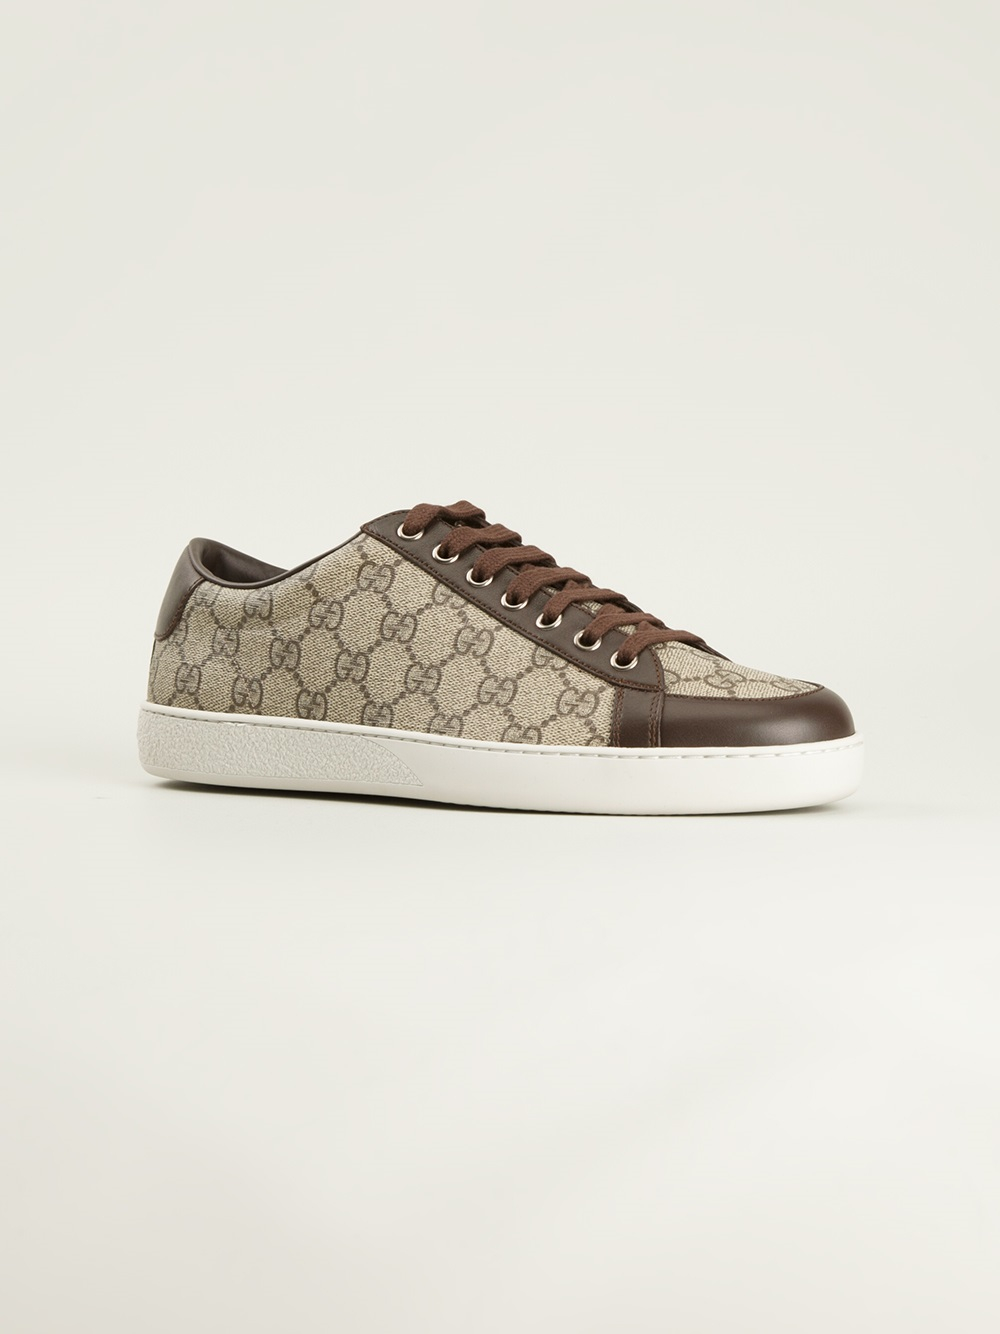 Gucci Logo Trainers in Brown for Men - Lyst